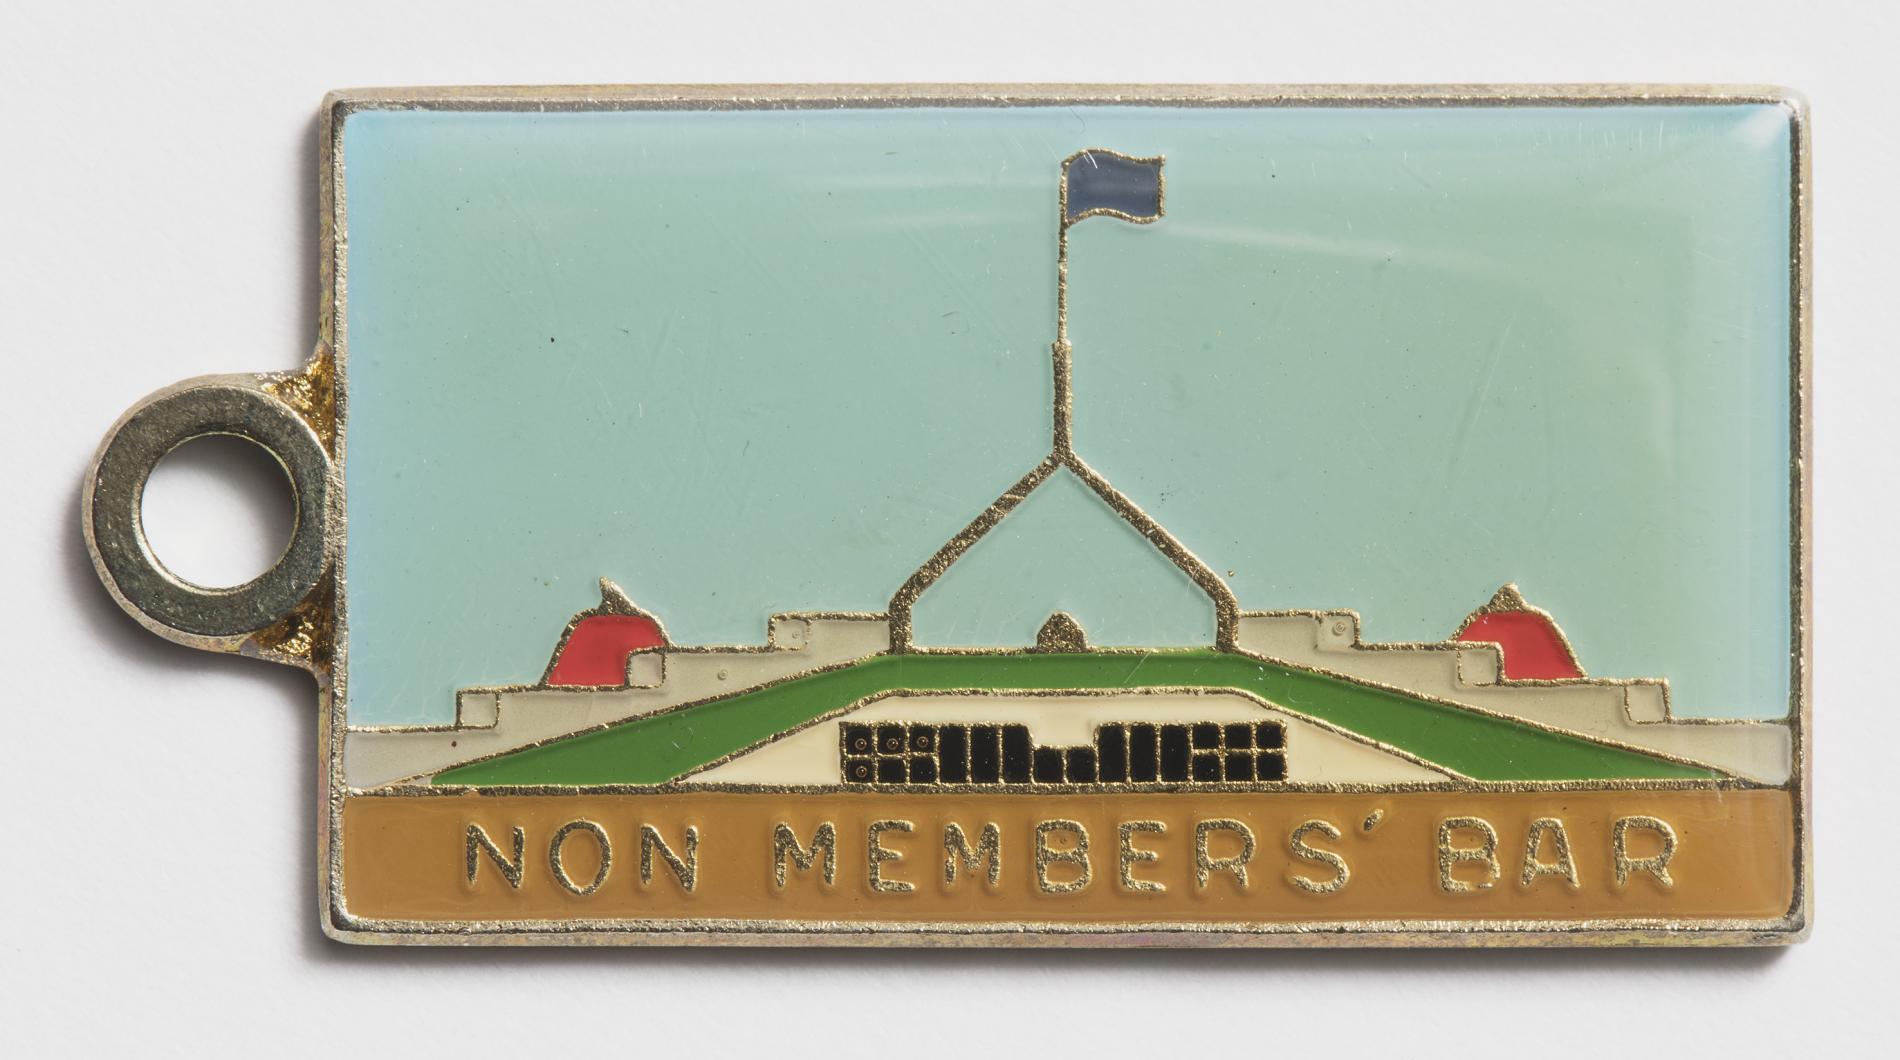 Photograph of a metal tag labled "Non members bar"